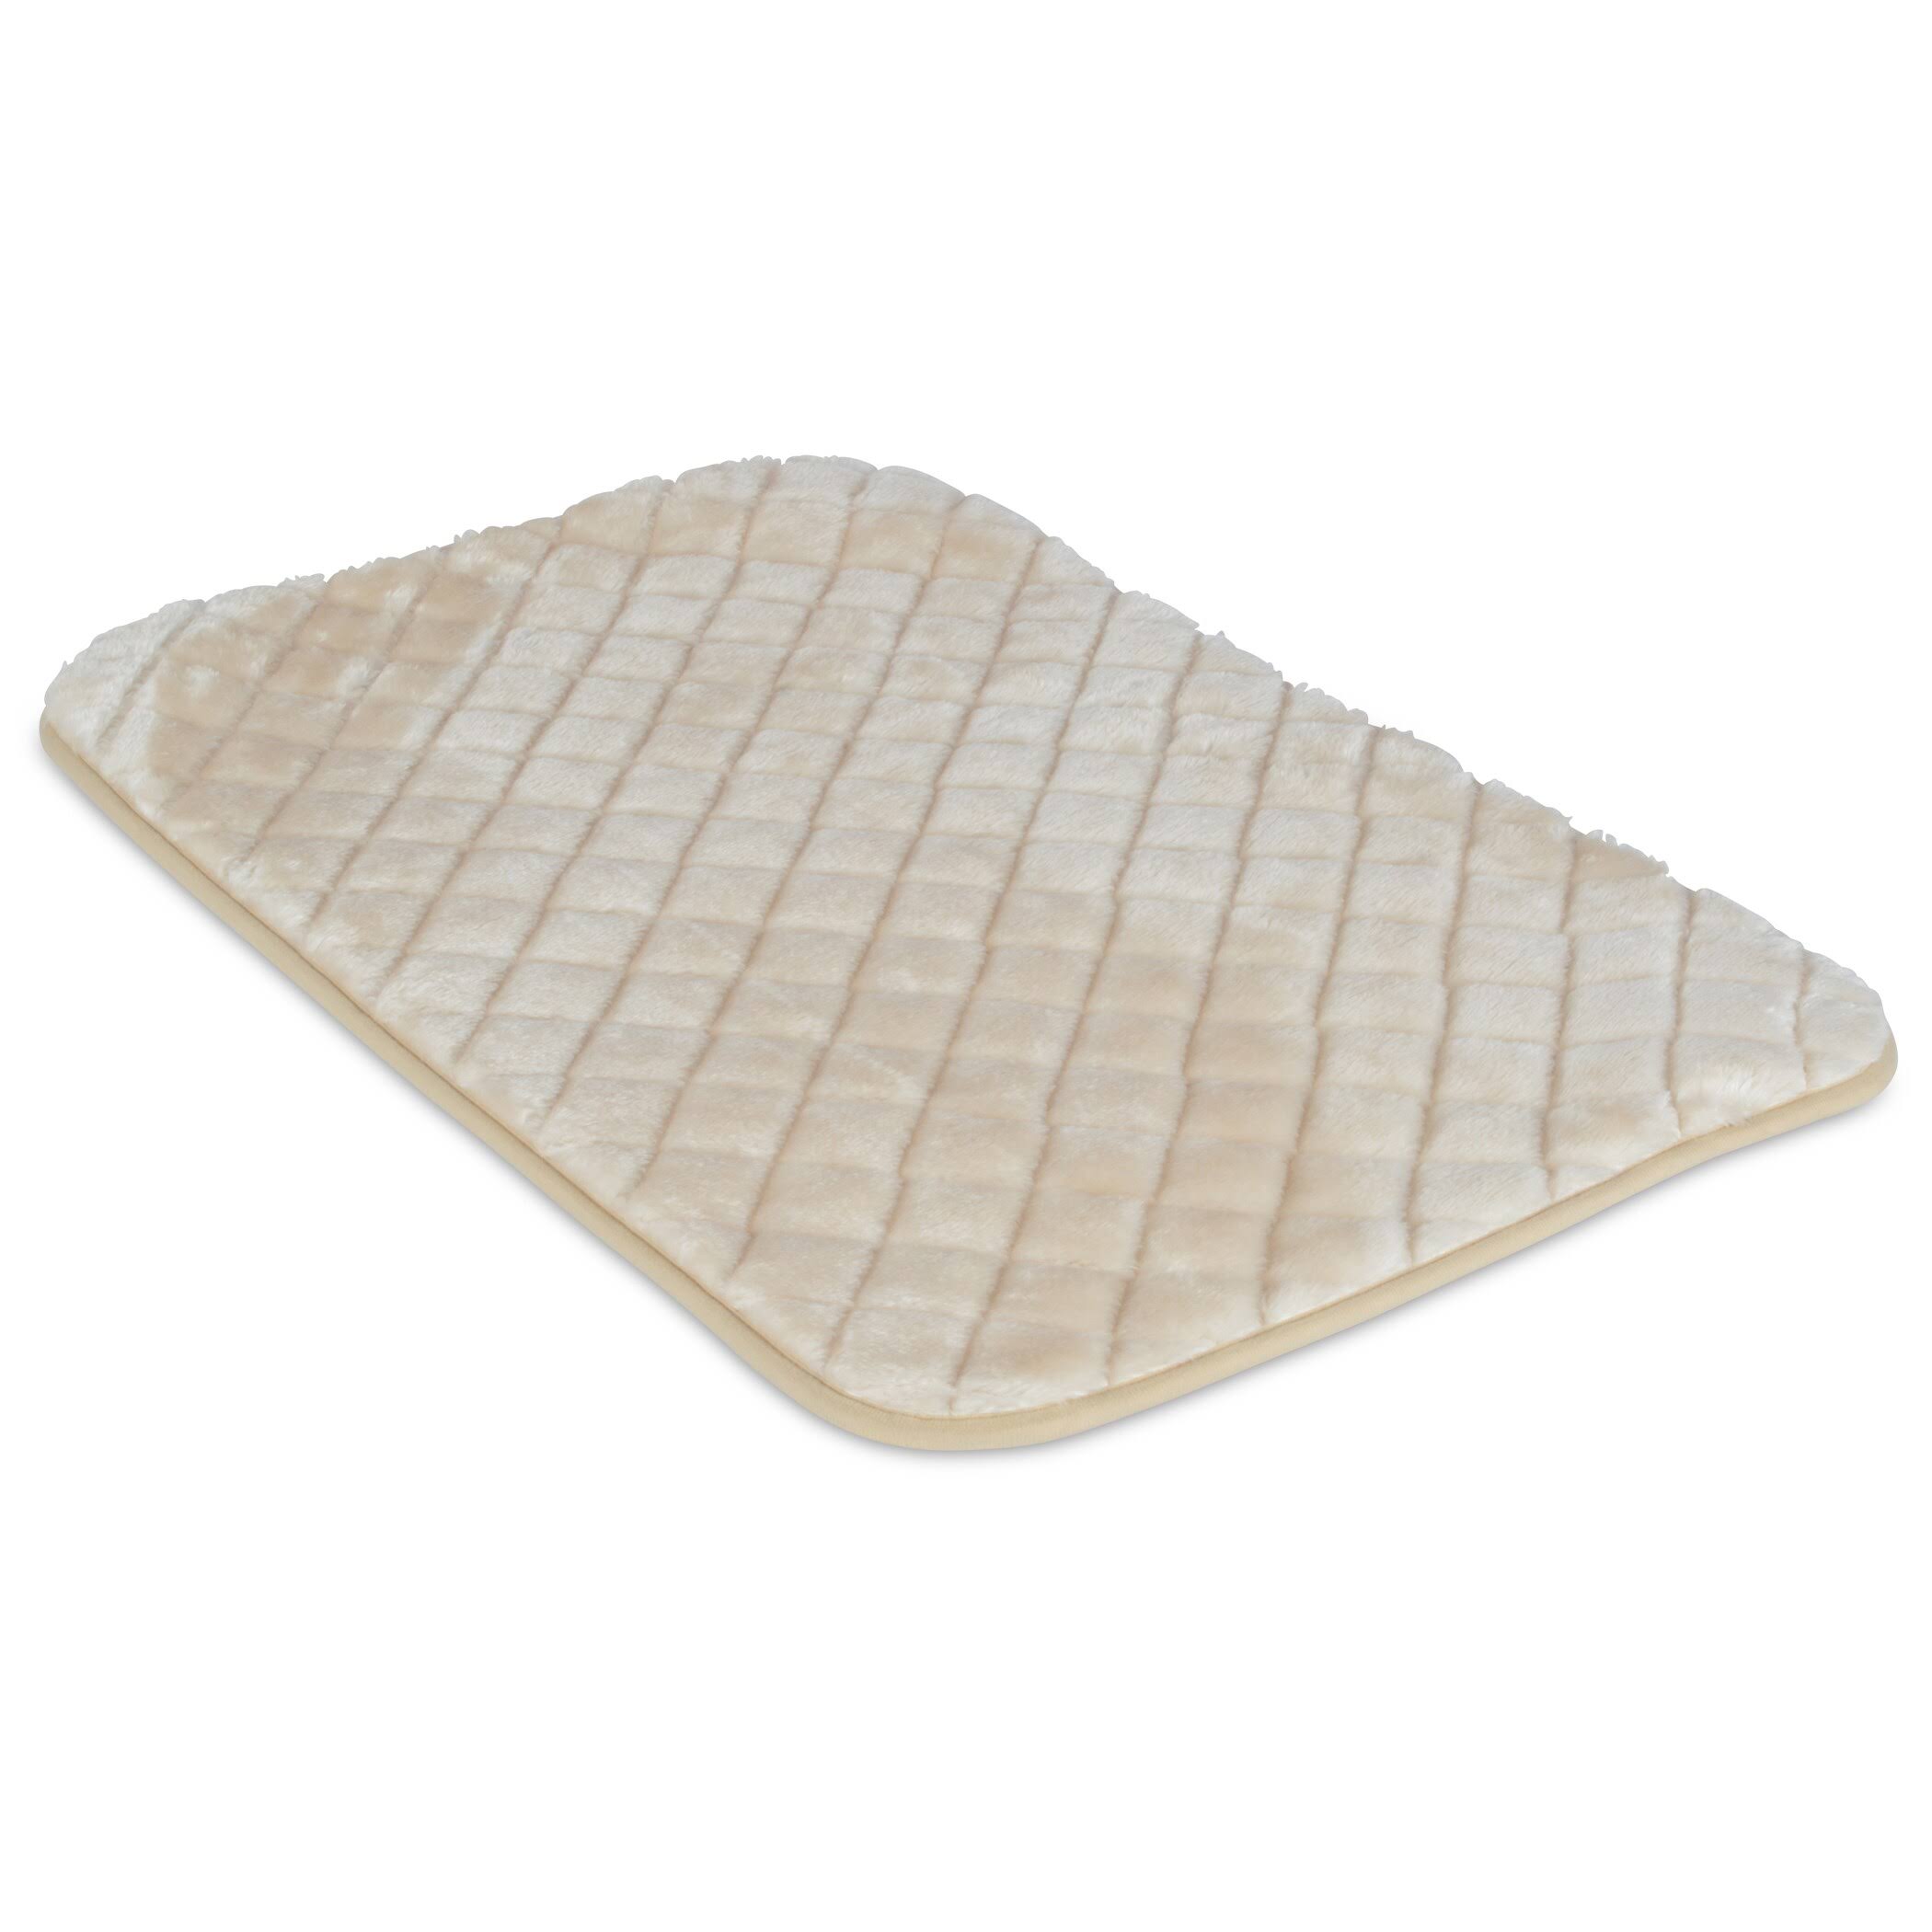 Precision Pet Snoozzy Sleeper Dog Bed - Natural, 35in x 23in